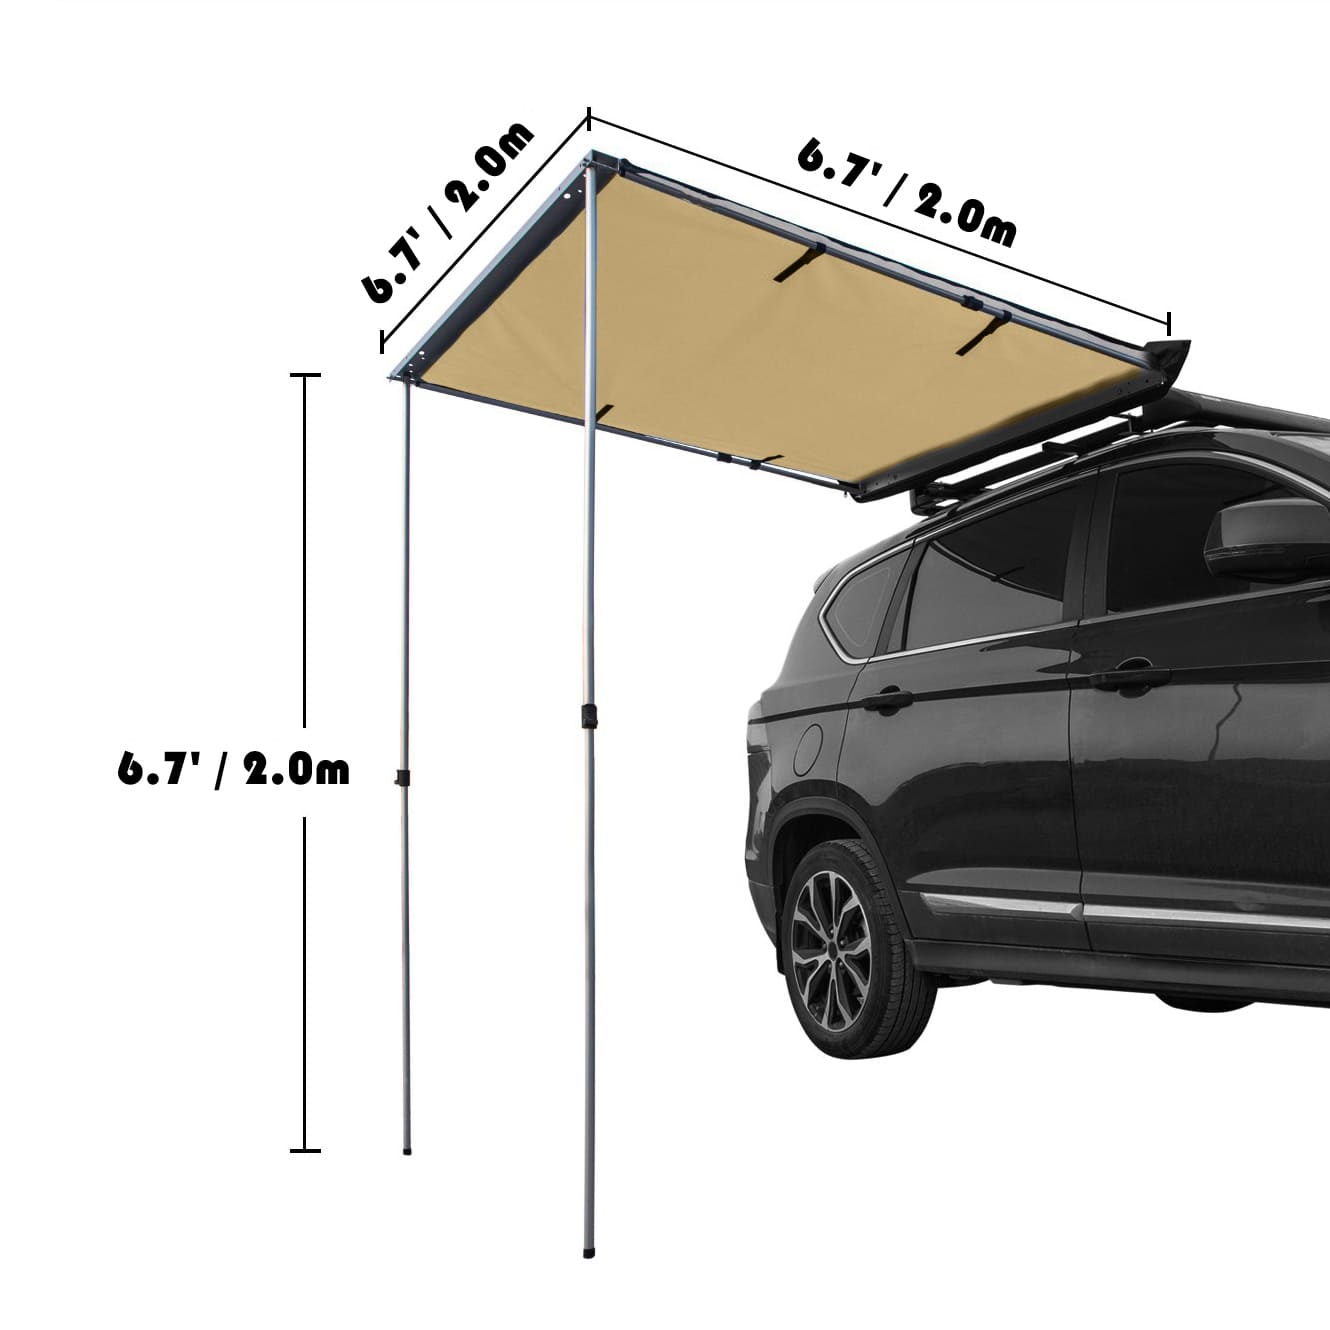 6.7' x 6.7' Car Side Awning, Soft Shell, Pull Out Rooftop Tent Shelter - BENEHIKE